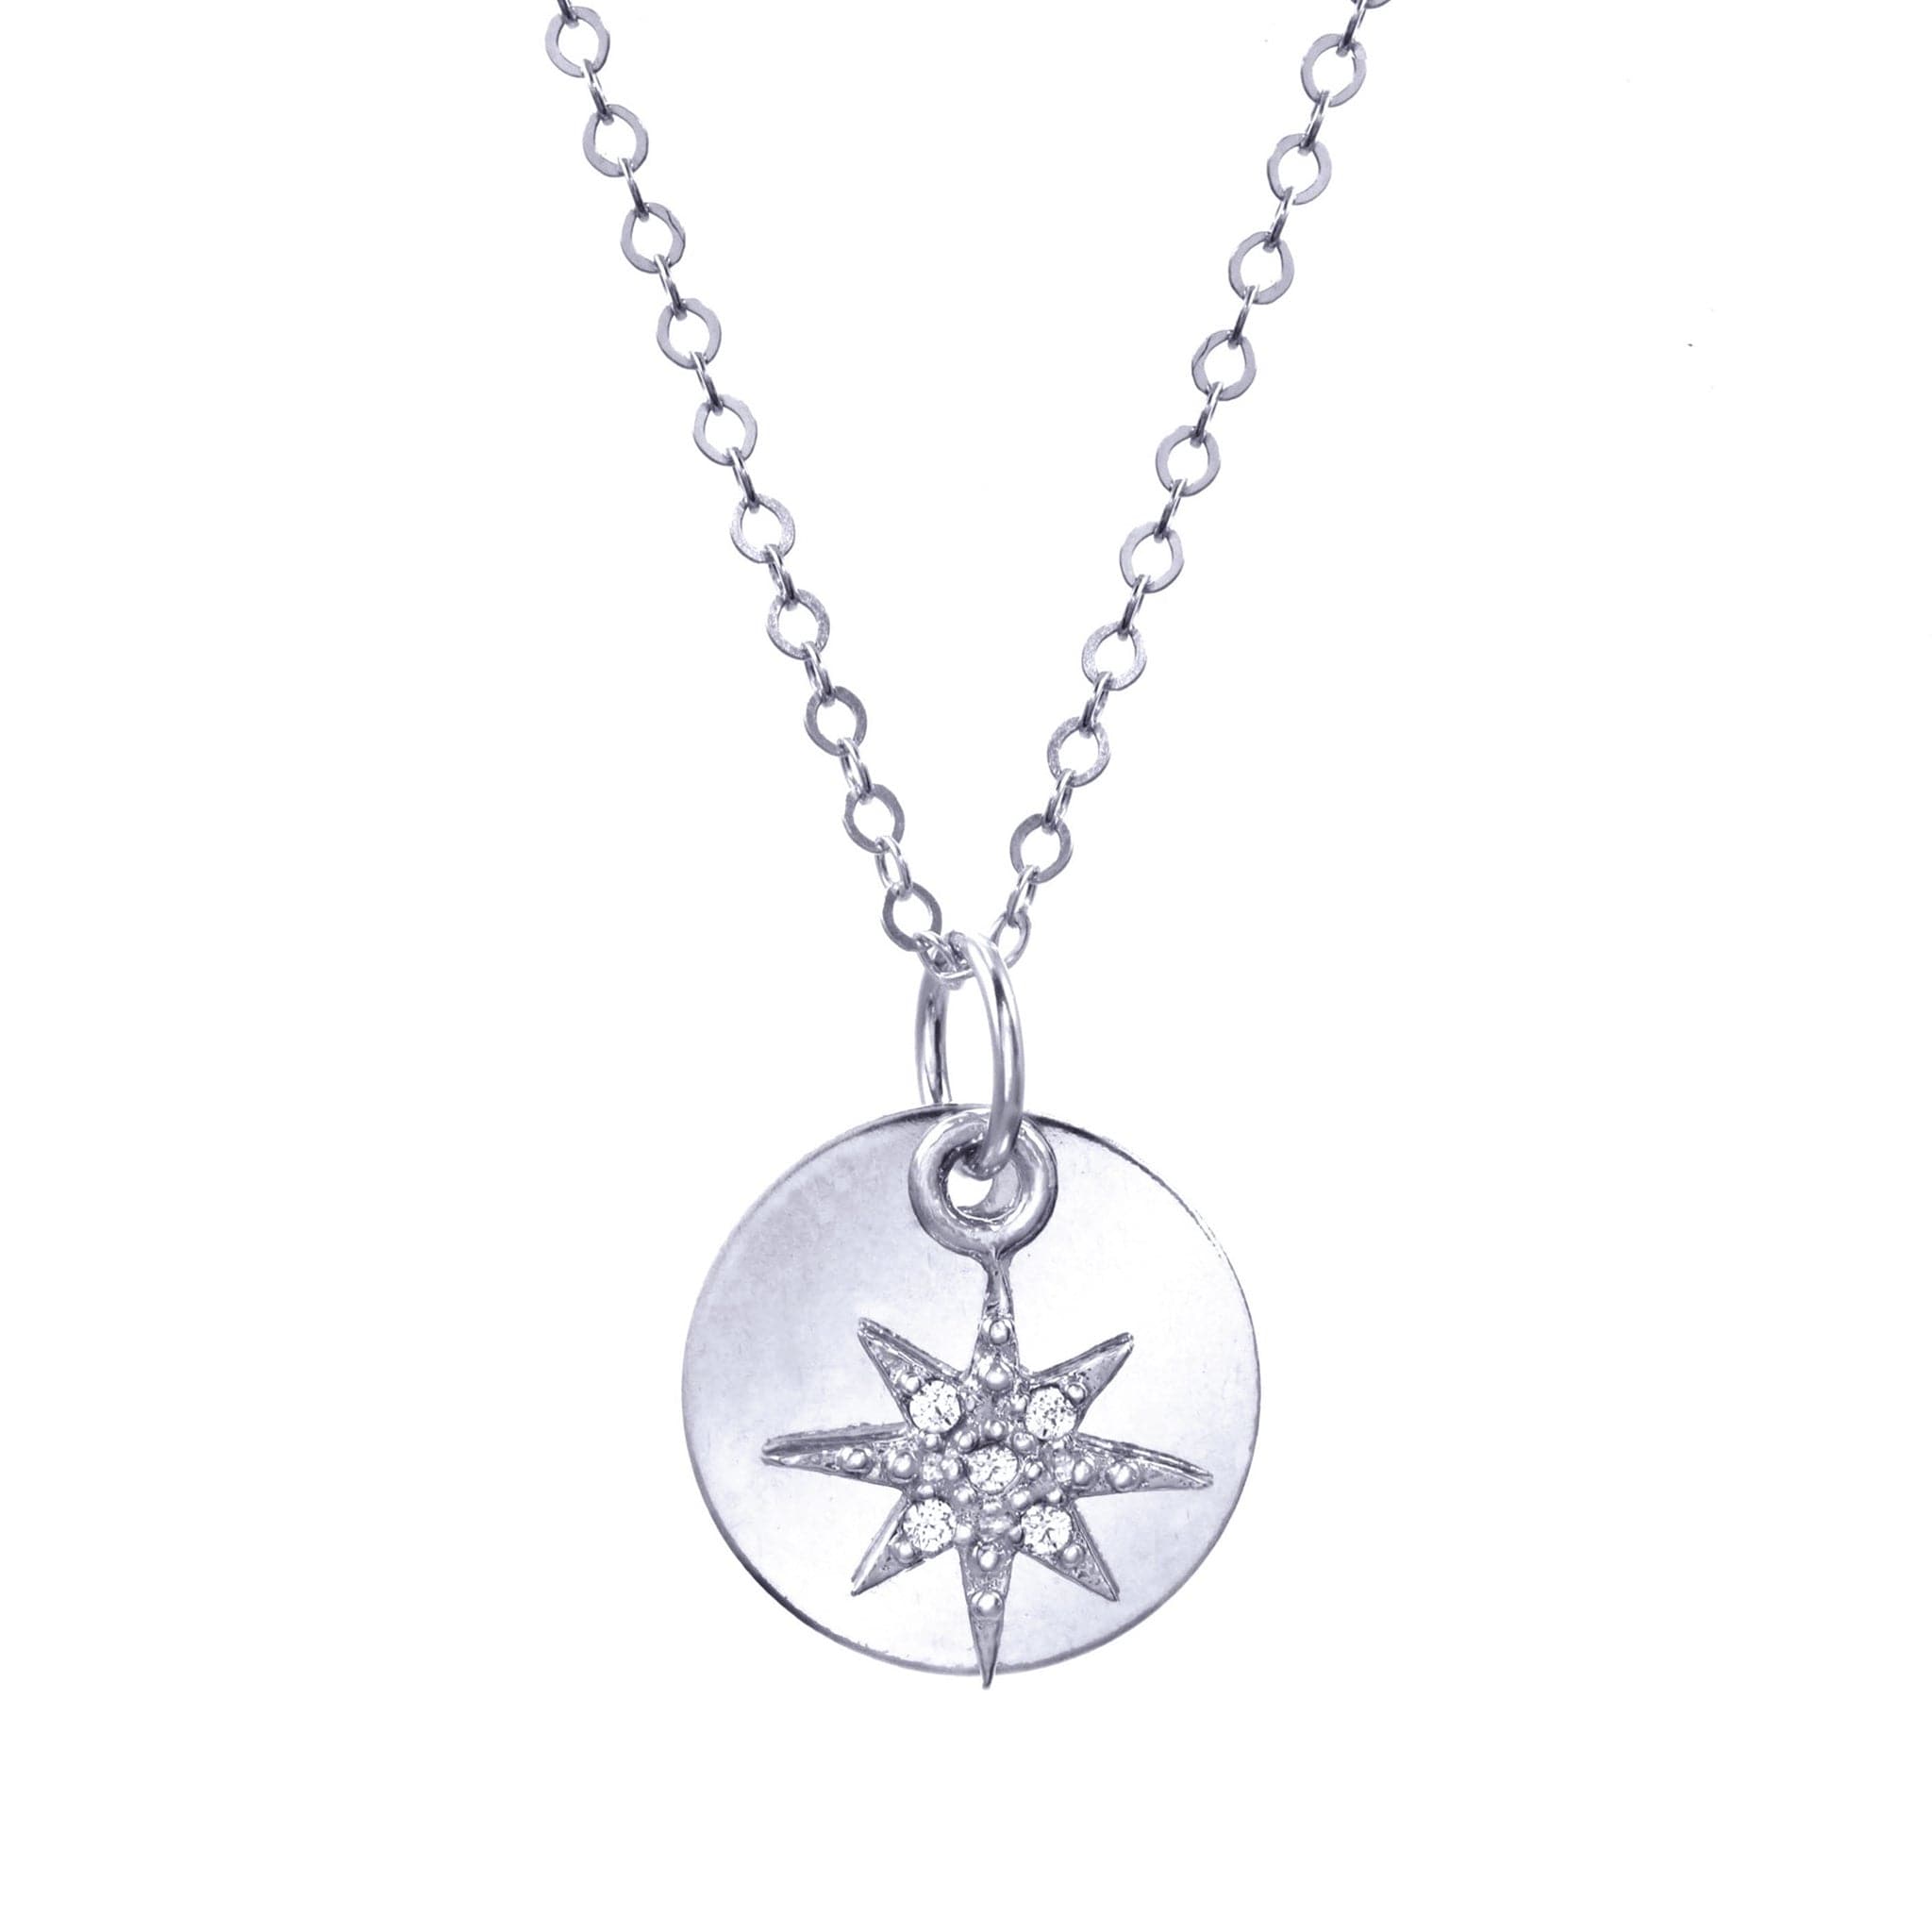 Long silver chain and circle silver pendant with crystal gemmed star charm.